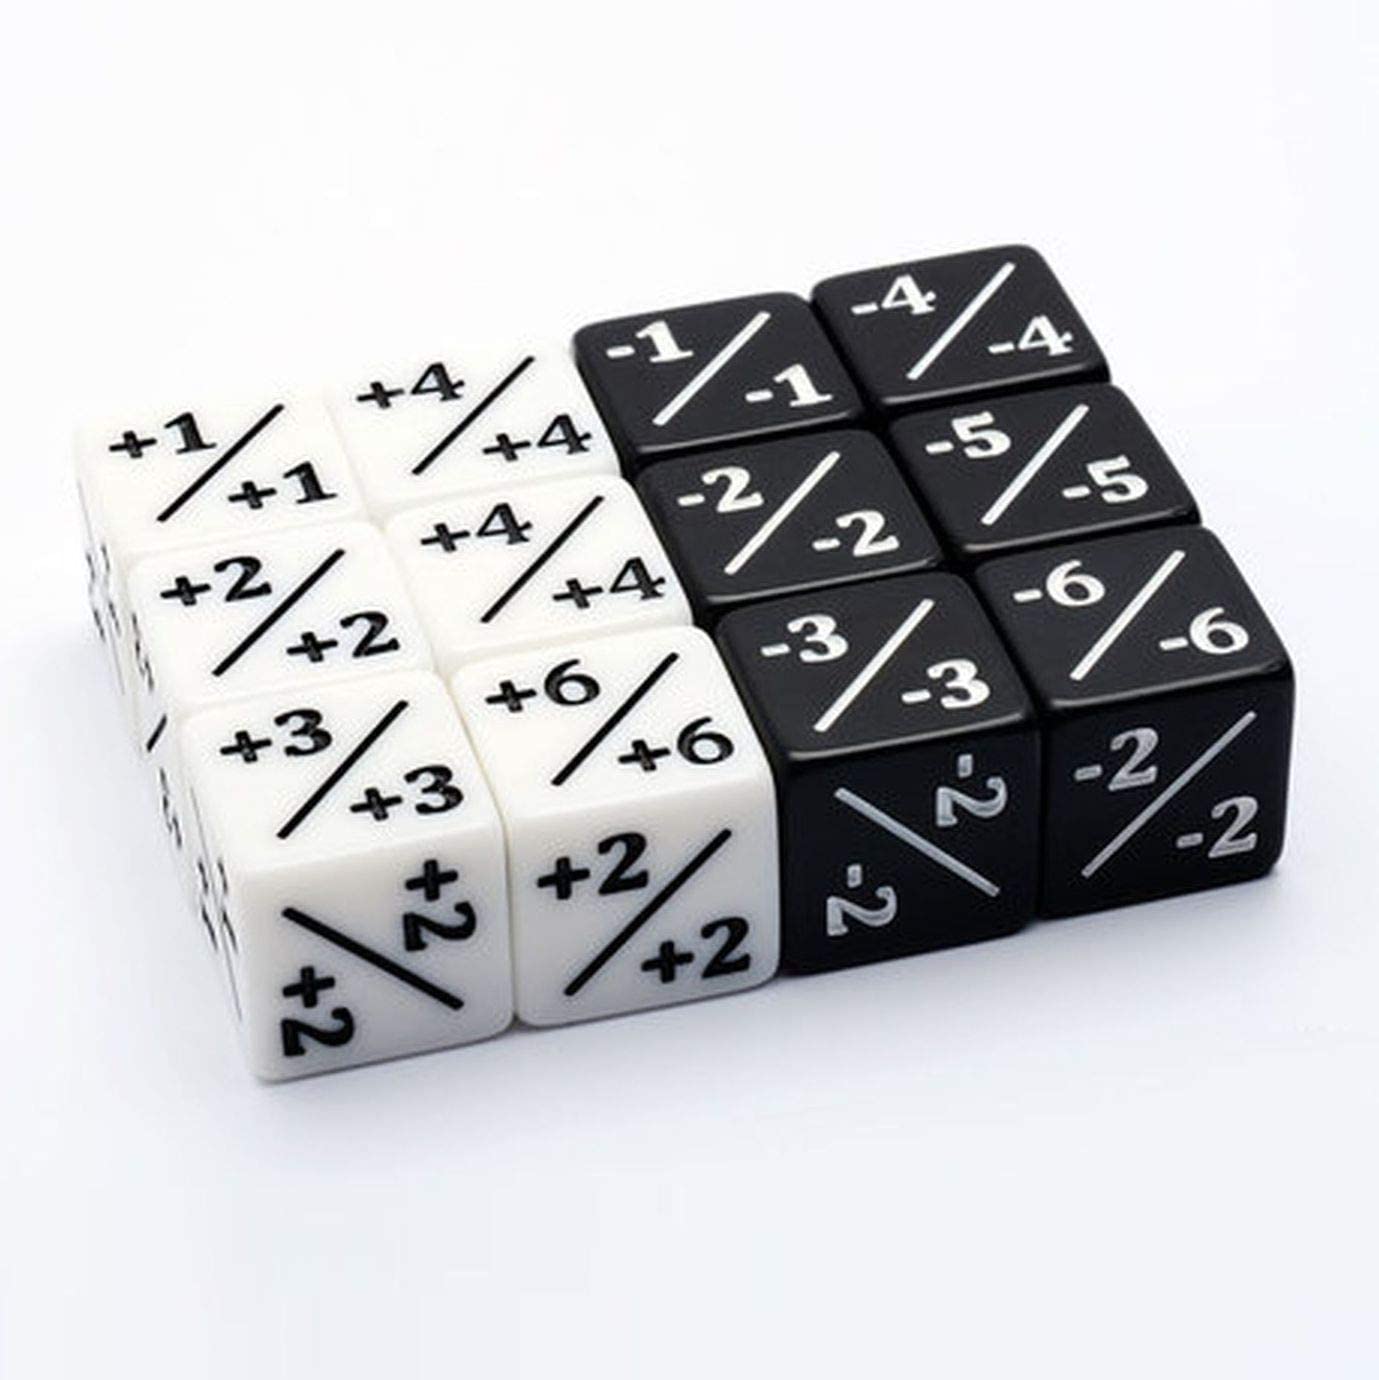 Dice Counter Positive and Negative 10 pcs per Pack